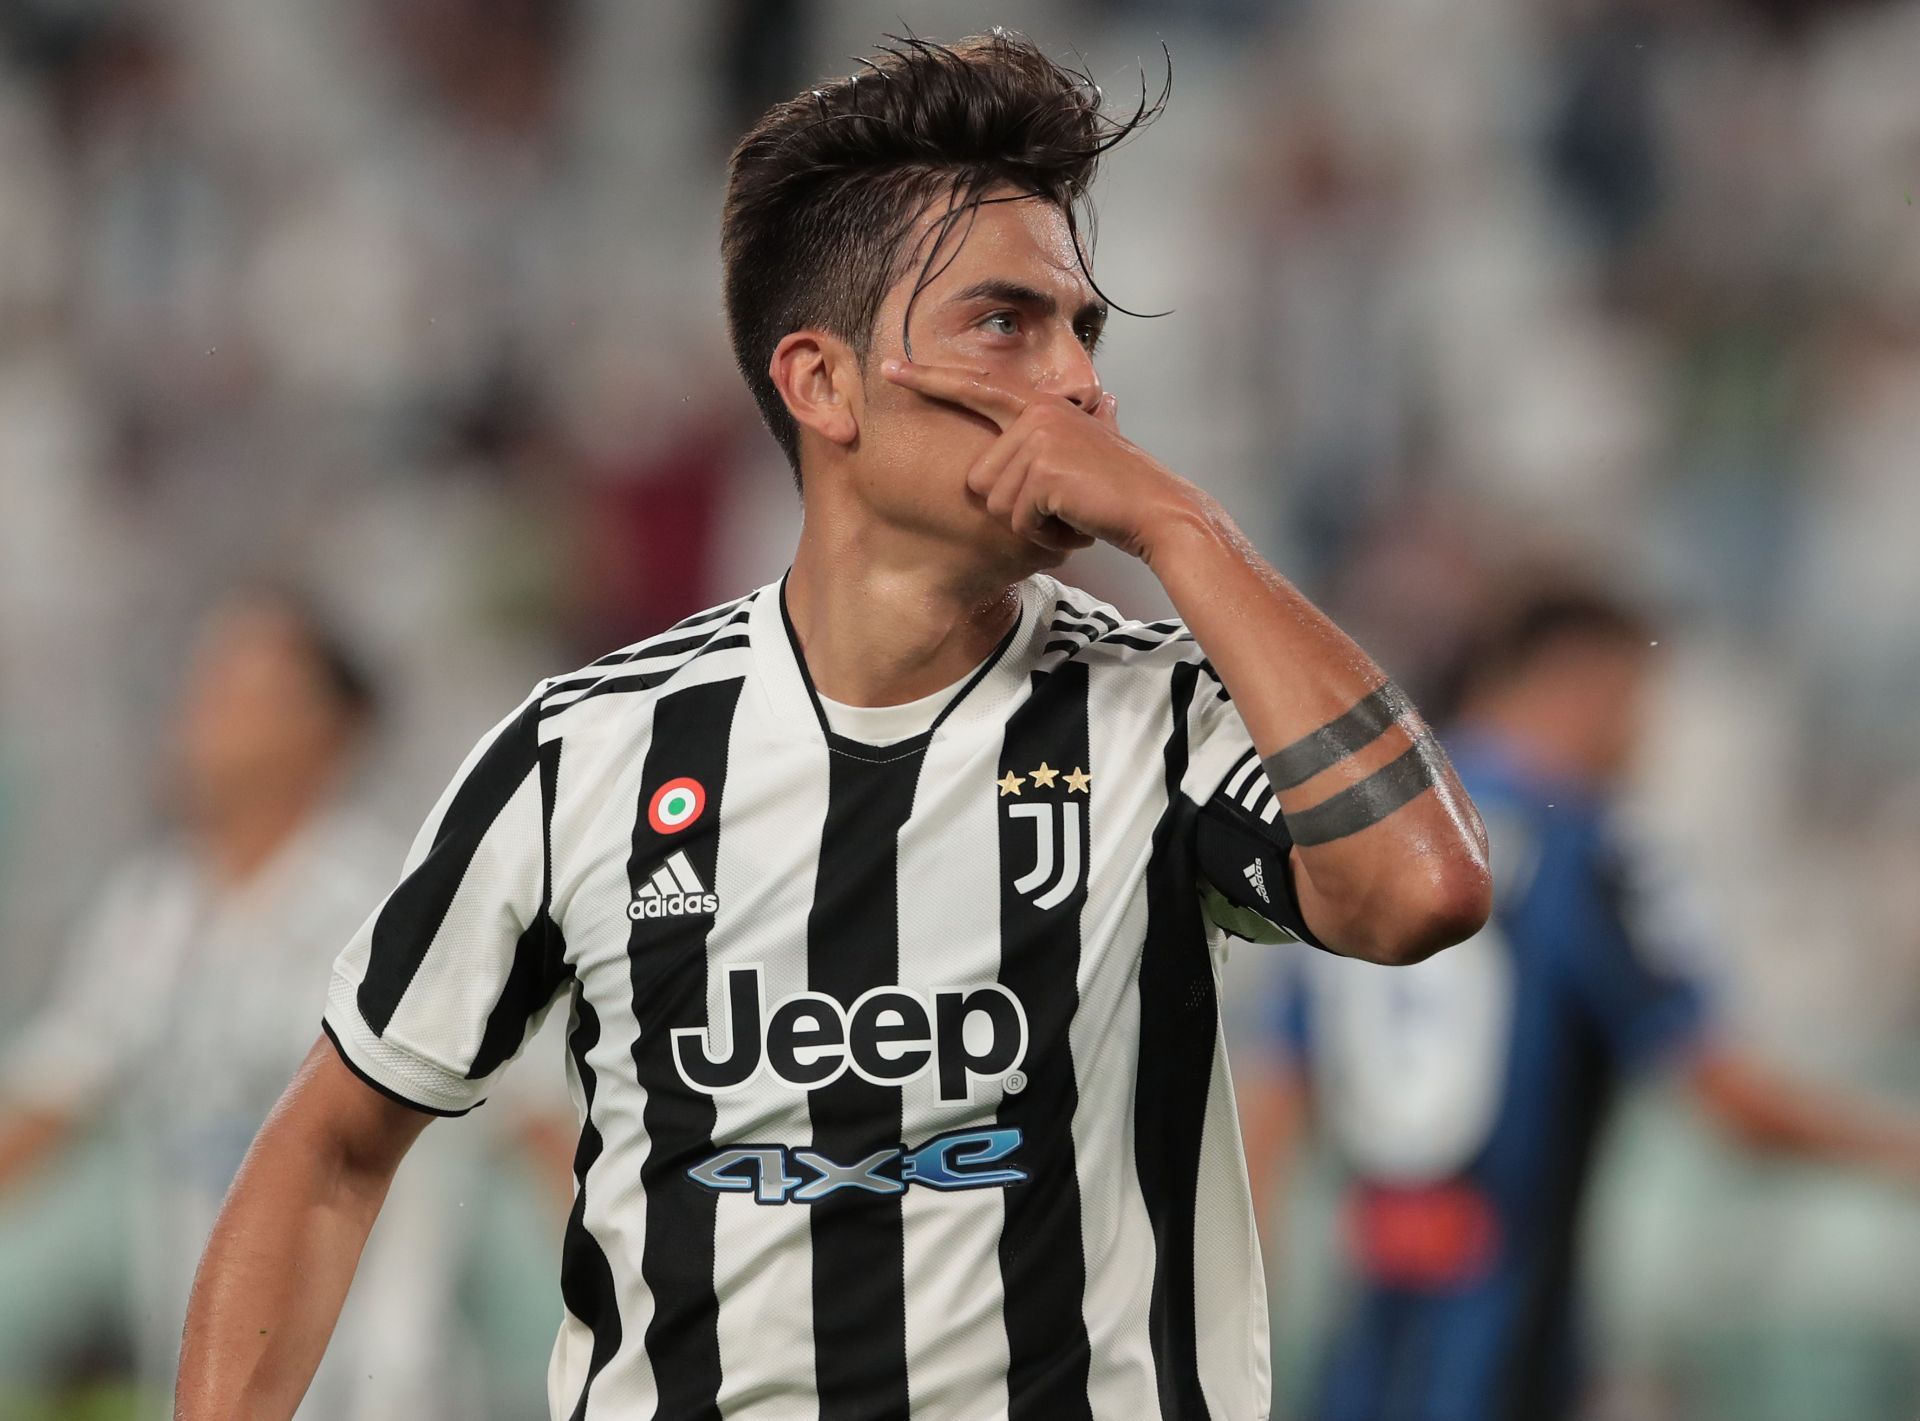 Paulo Dybala is currently a free agent after leaving Juventus and is likely to have multiple suitors this summer.